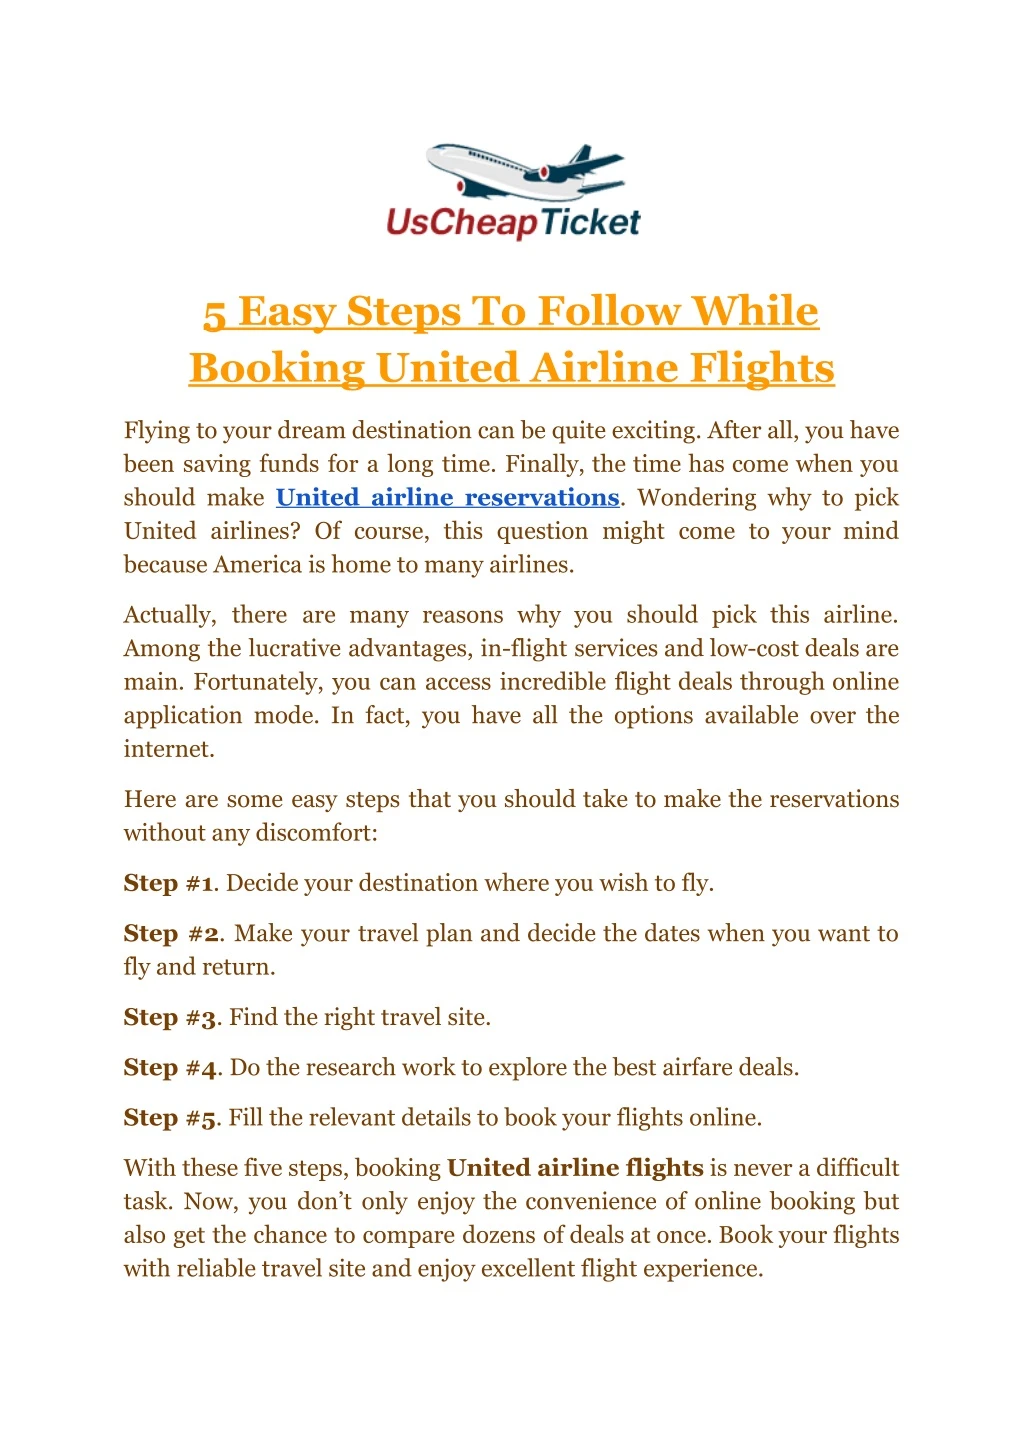 5 easy steps to follow while booking united